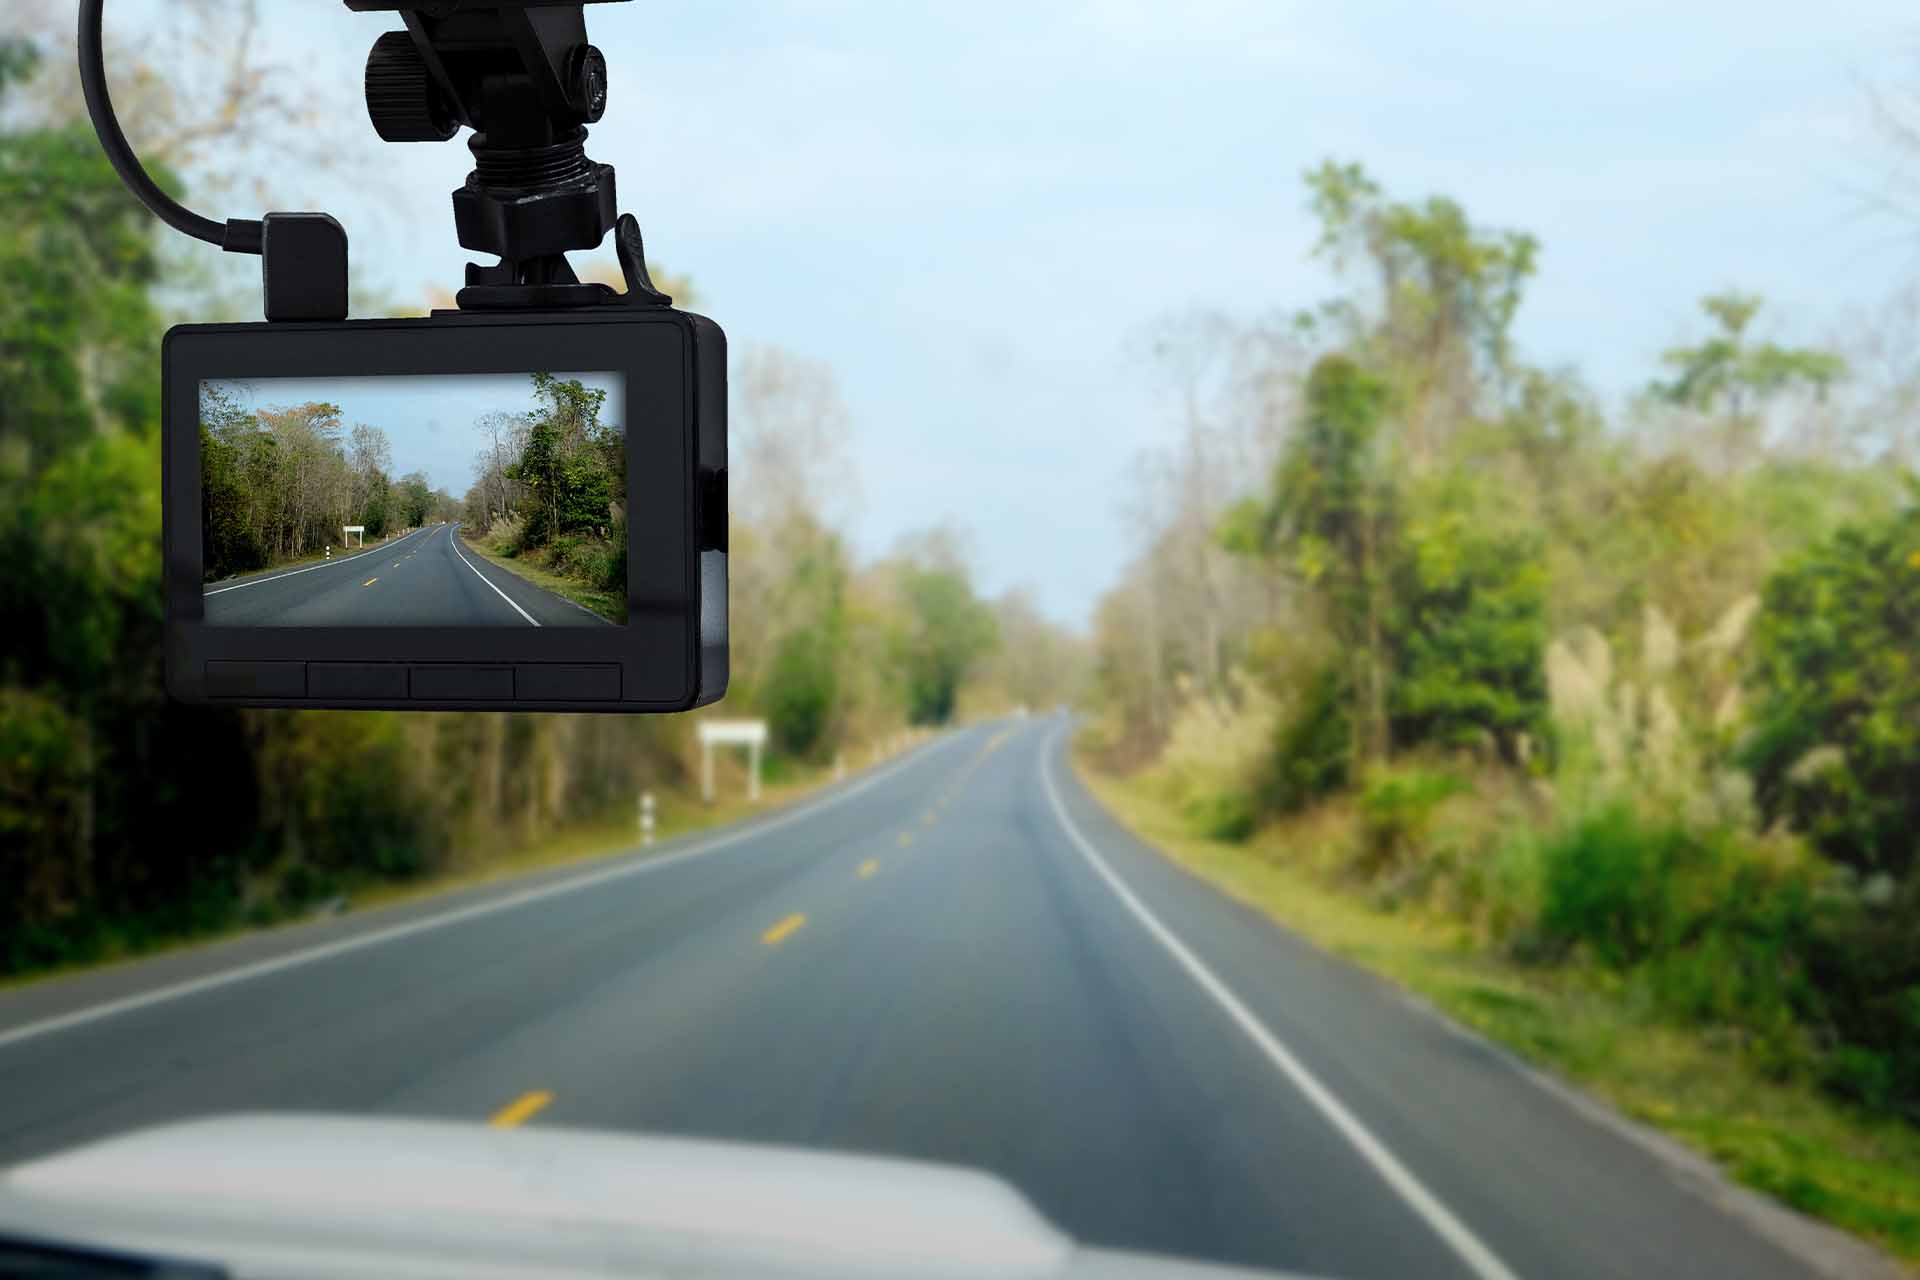 How To Install A Dashcam, Step By Step Guide